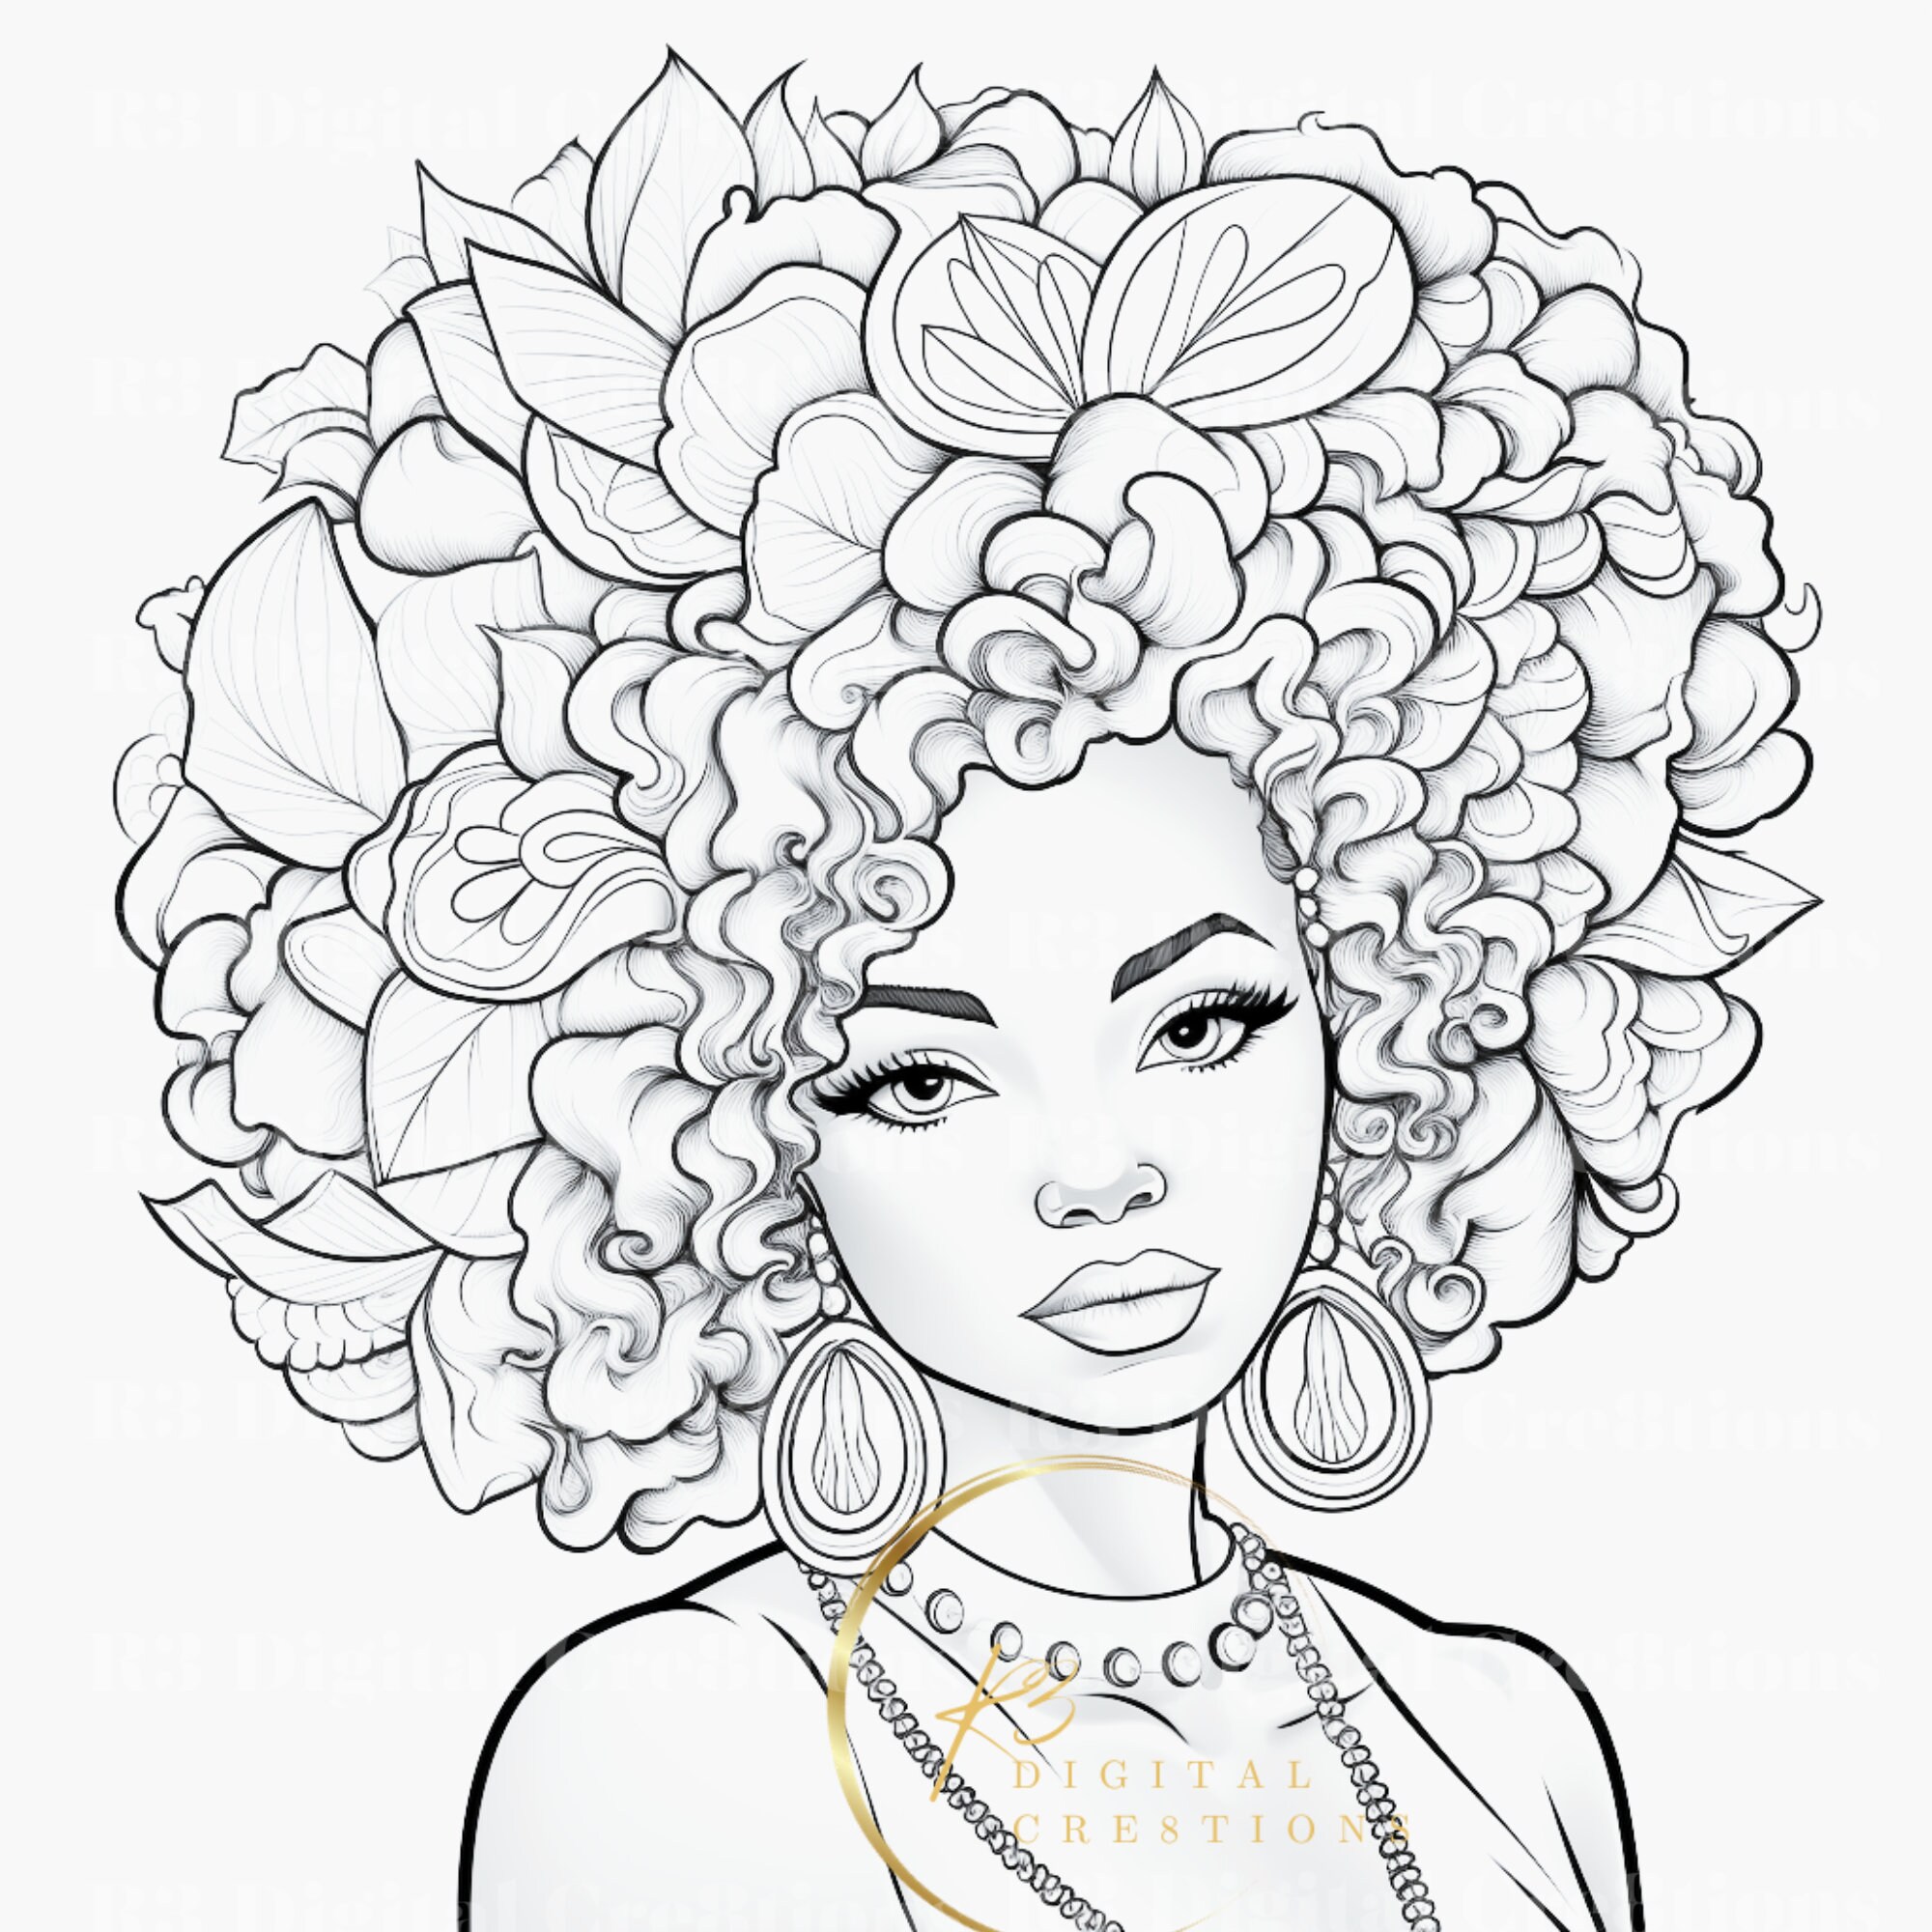 African American Woman AI Art Coloring Page - Etsy